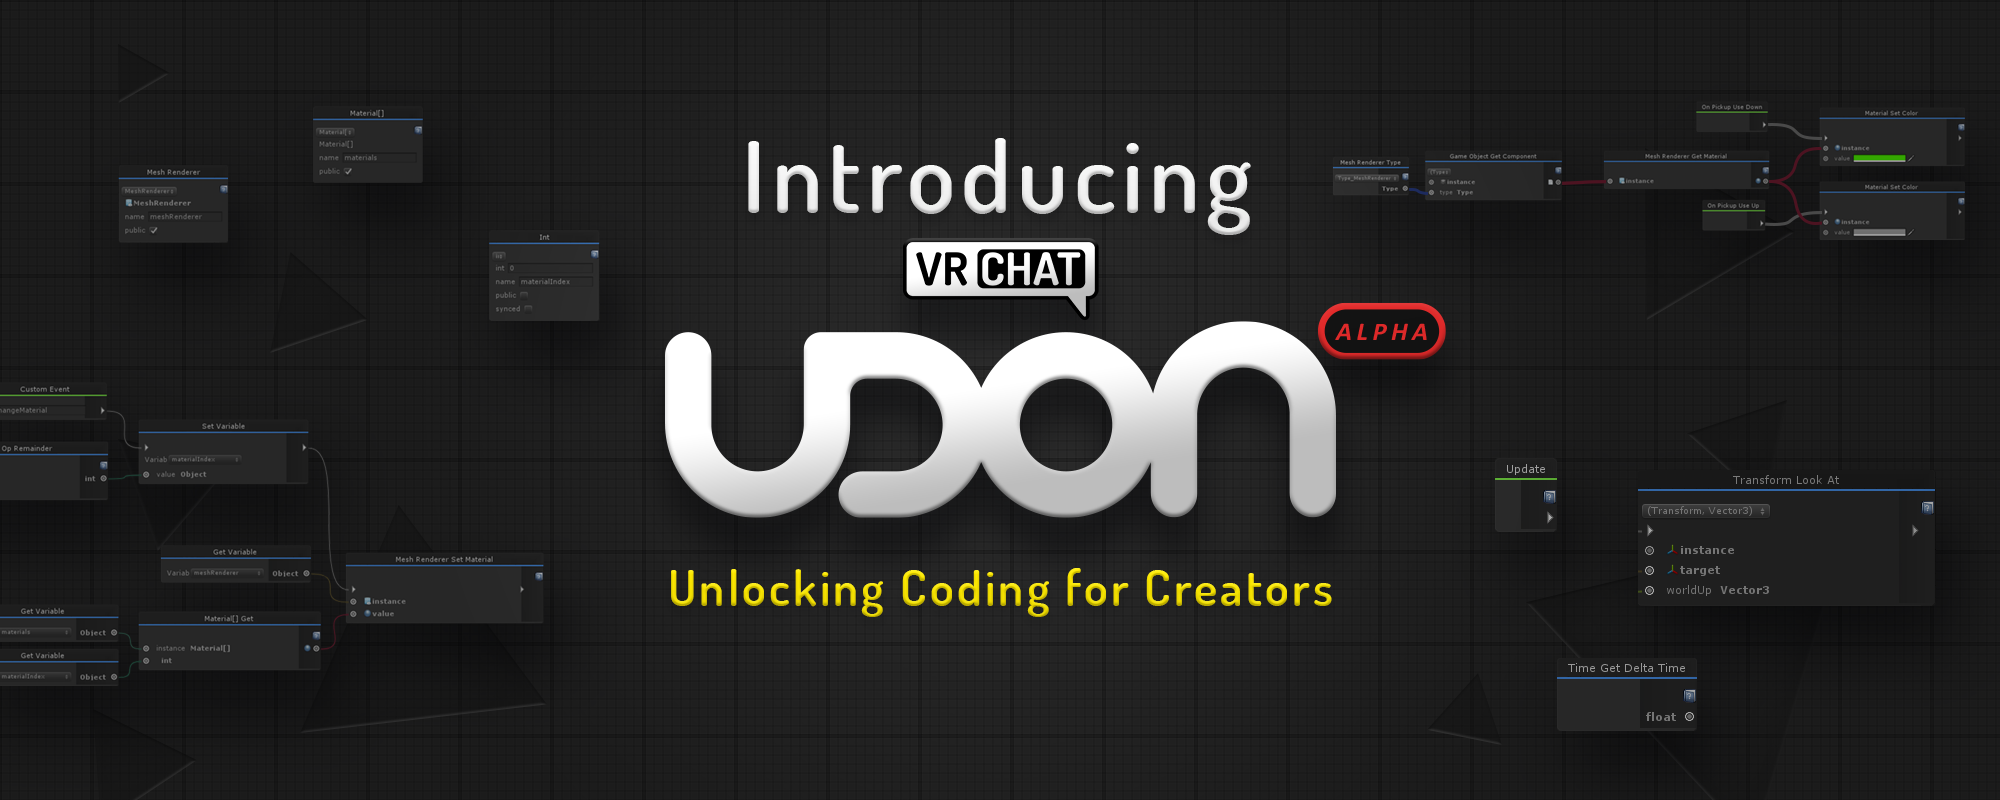 Introducing Vrchat Udon Unlocking Coding For Creators